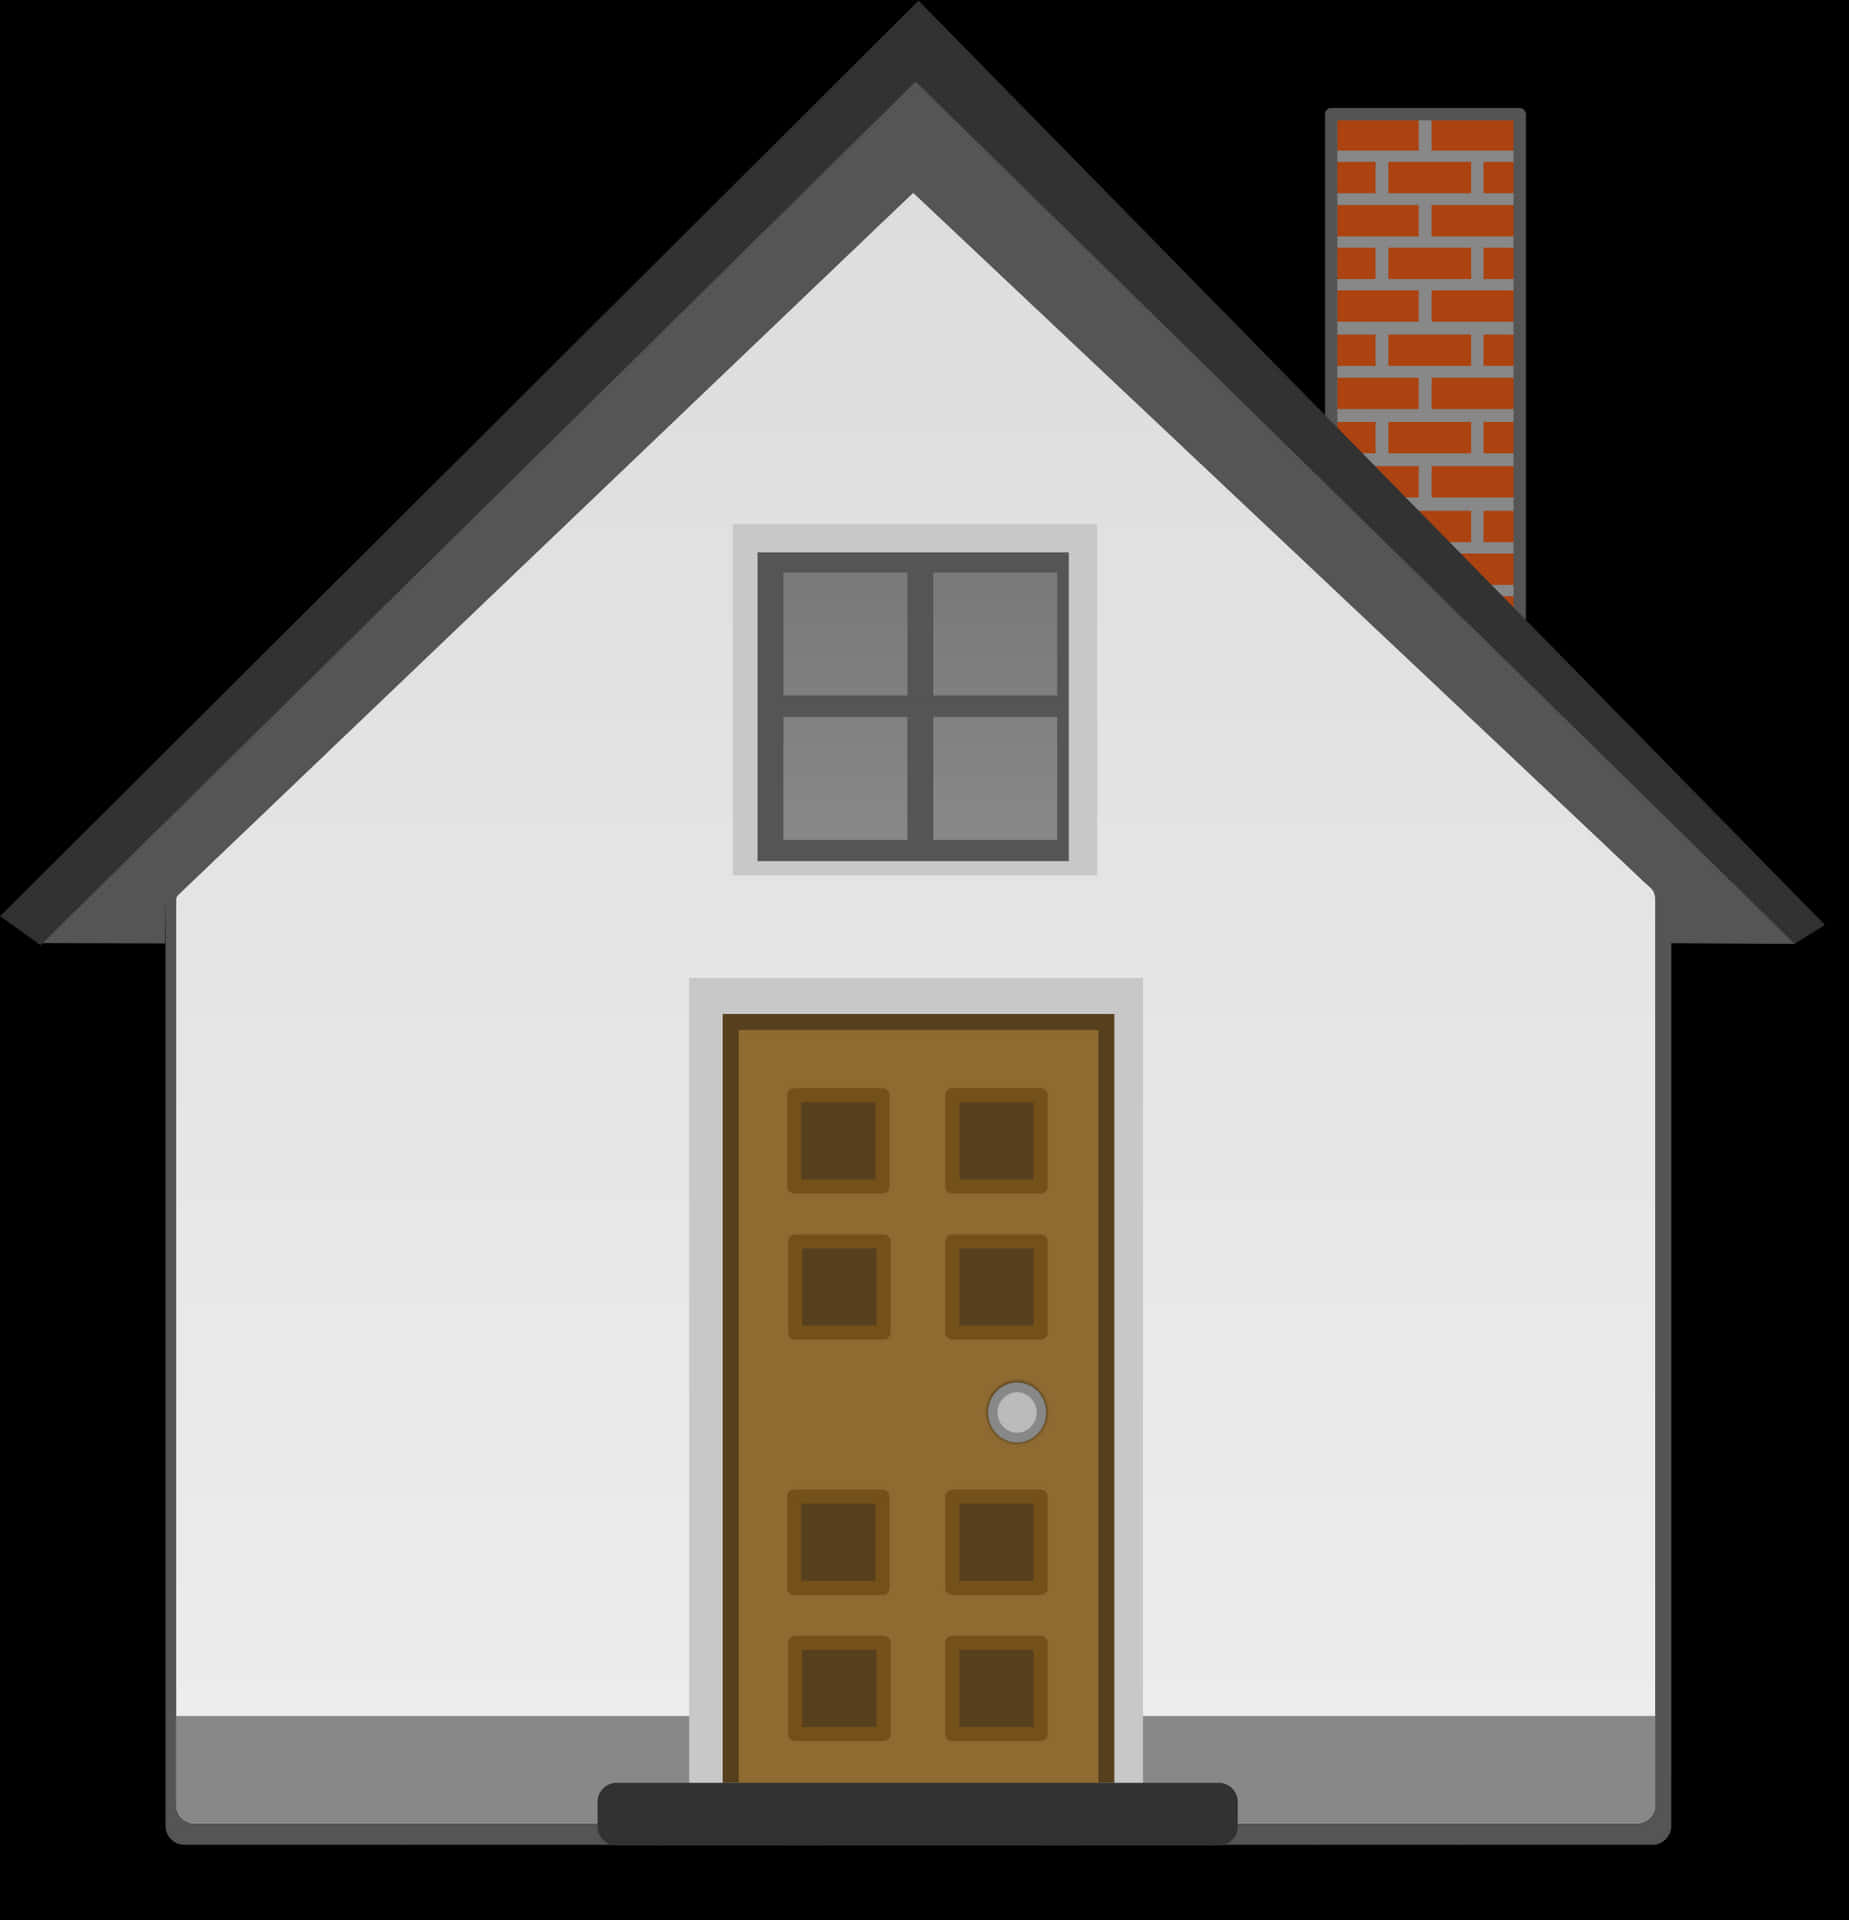 Simple Vector House Illustration PNG